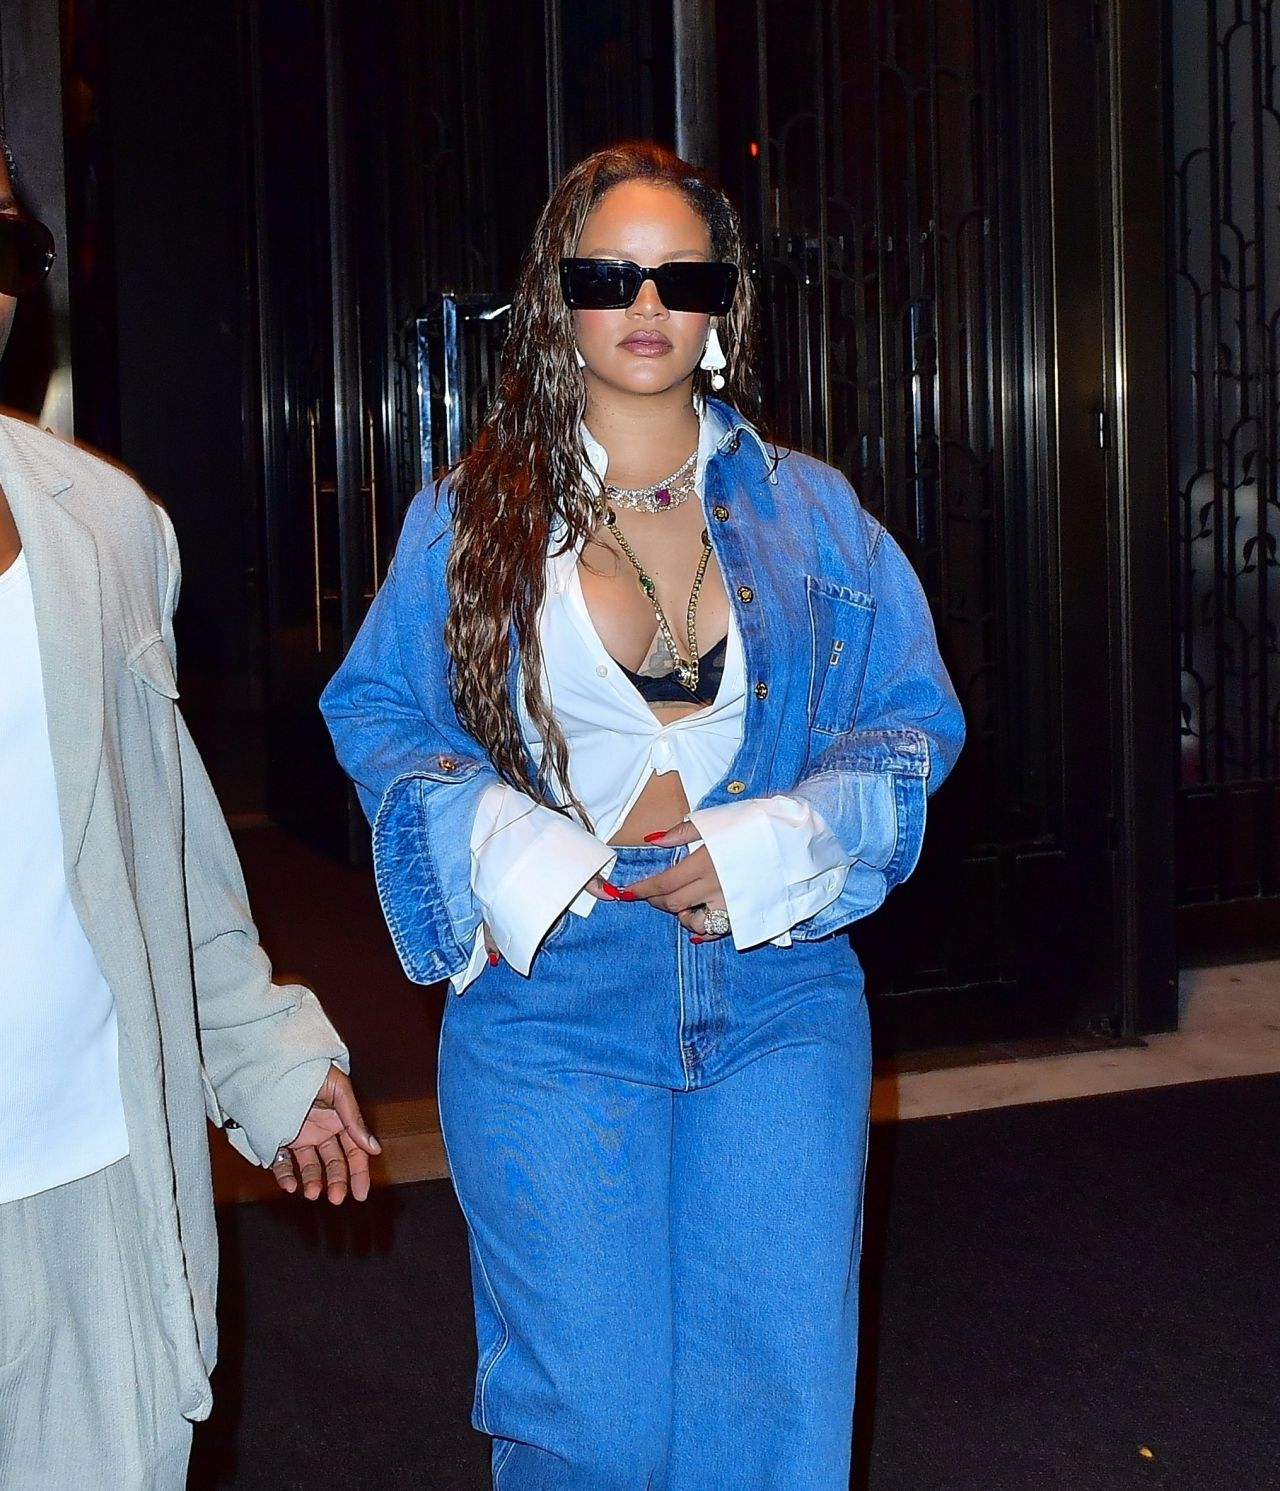 Rihanna steps out with A$AP Rocky on his birthday in New York City